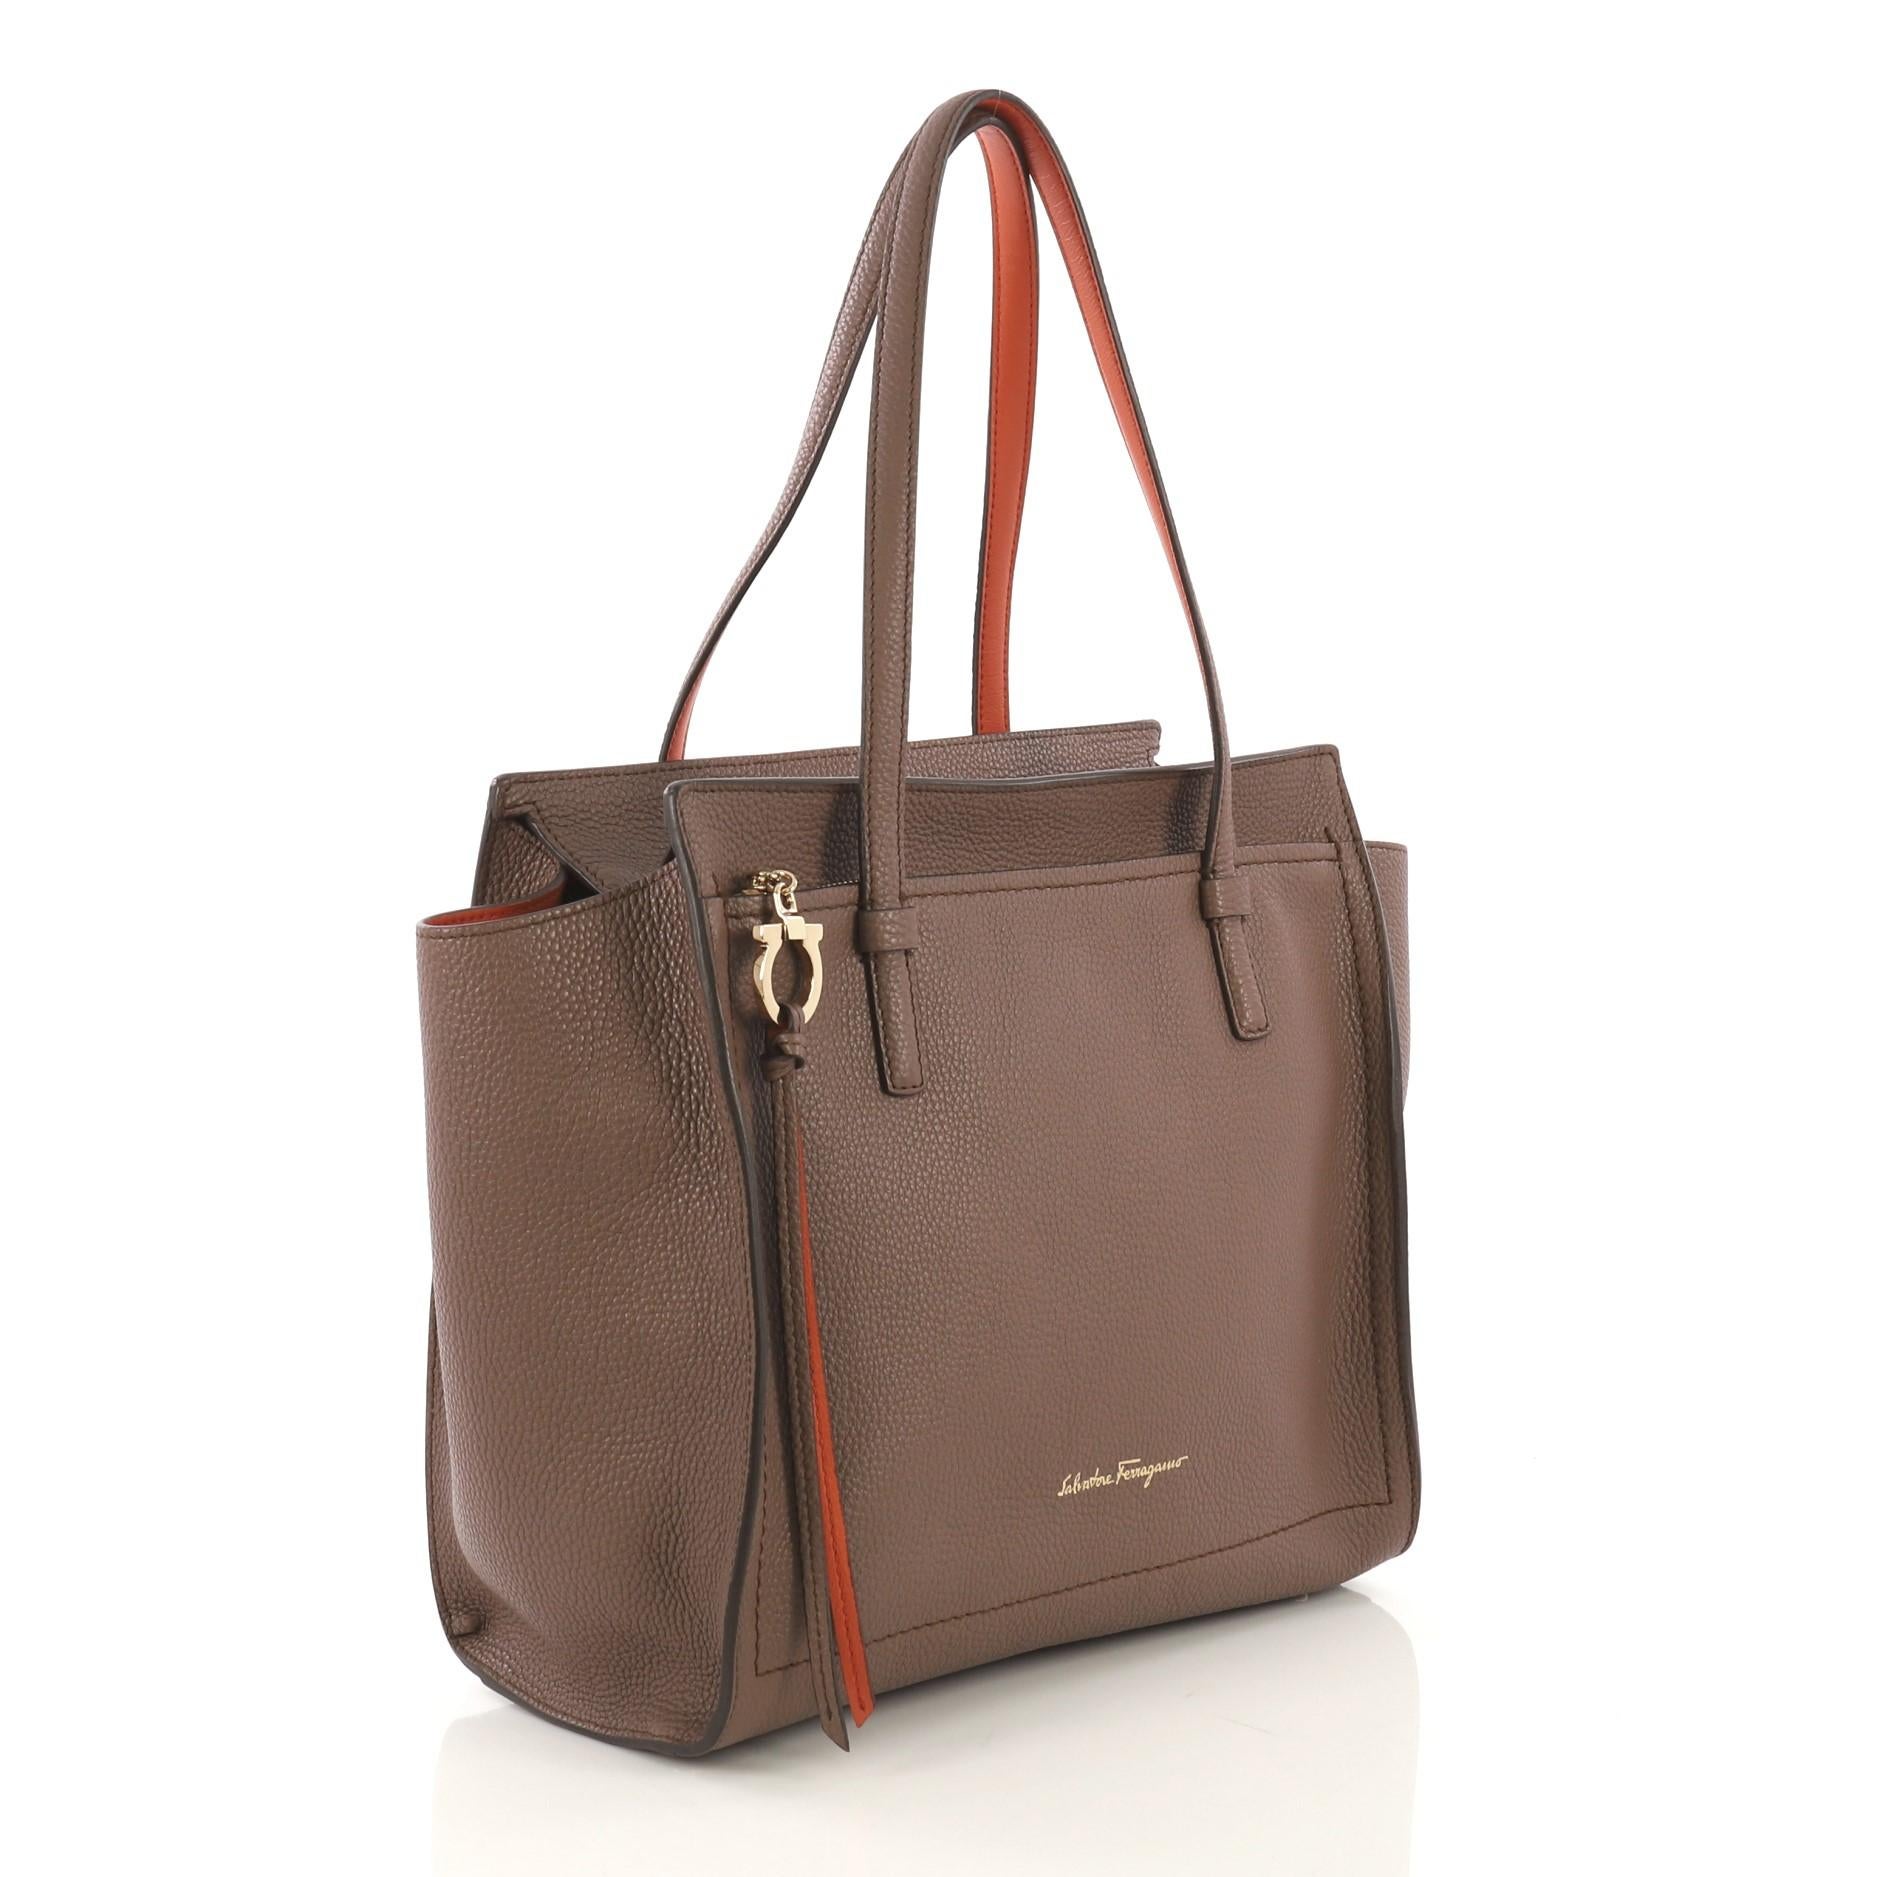 This Salvatore Ferragamo Amy Tote Pebbled Leather Medium, crafted from taupe pebbled leather, features exterior front zip pocket with Gancio charm zip pull, protective base studs and gold-tone hardware. Its zip closure opens to an orange leather